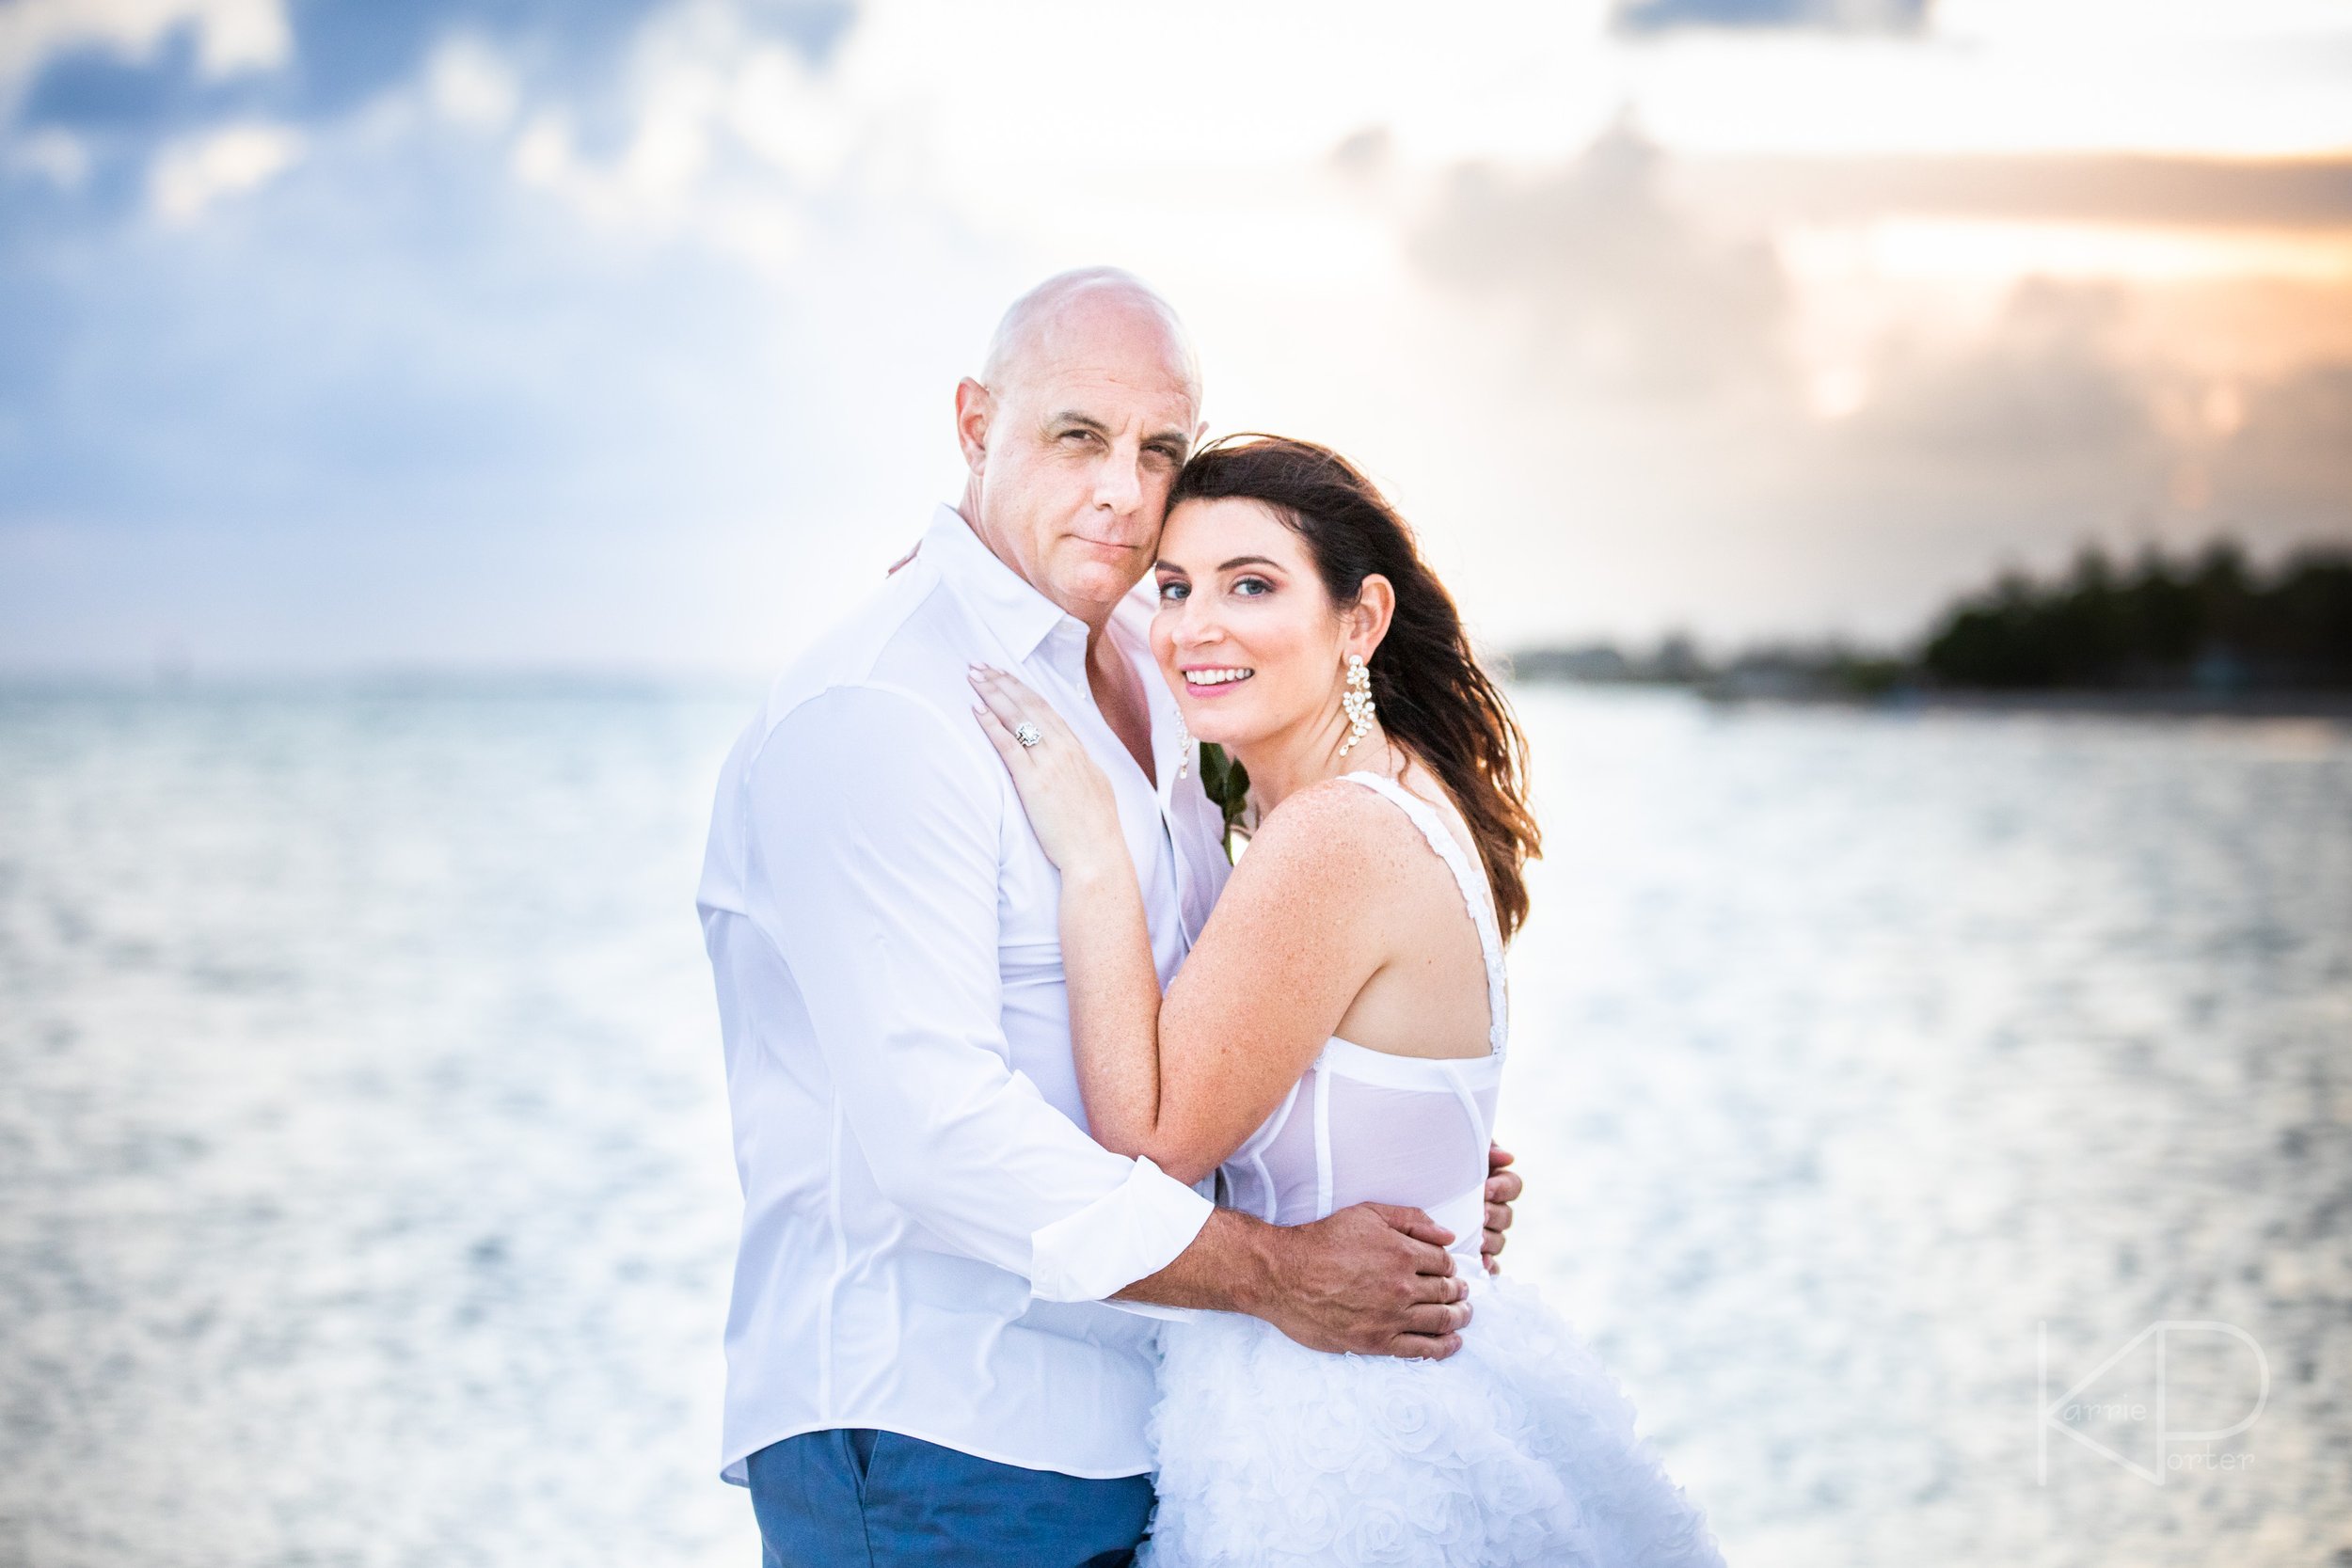  Wedding session captured in Key West by Karrie Porter Photography at Higgs Beach 